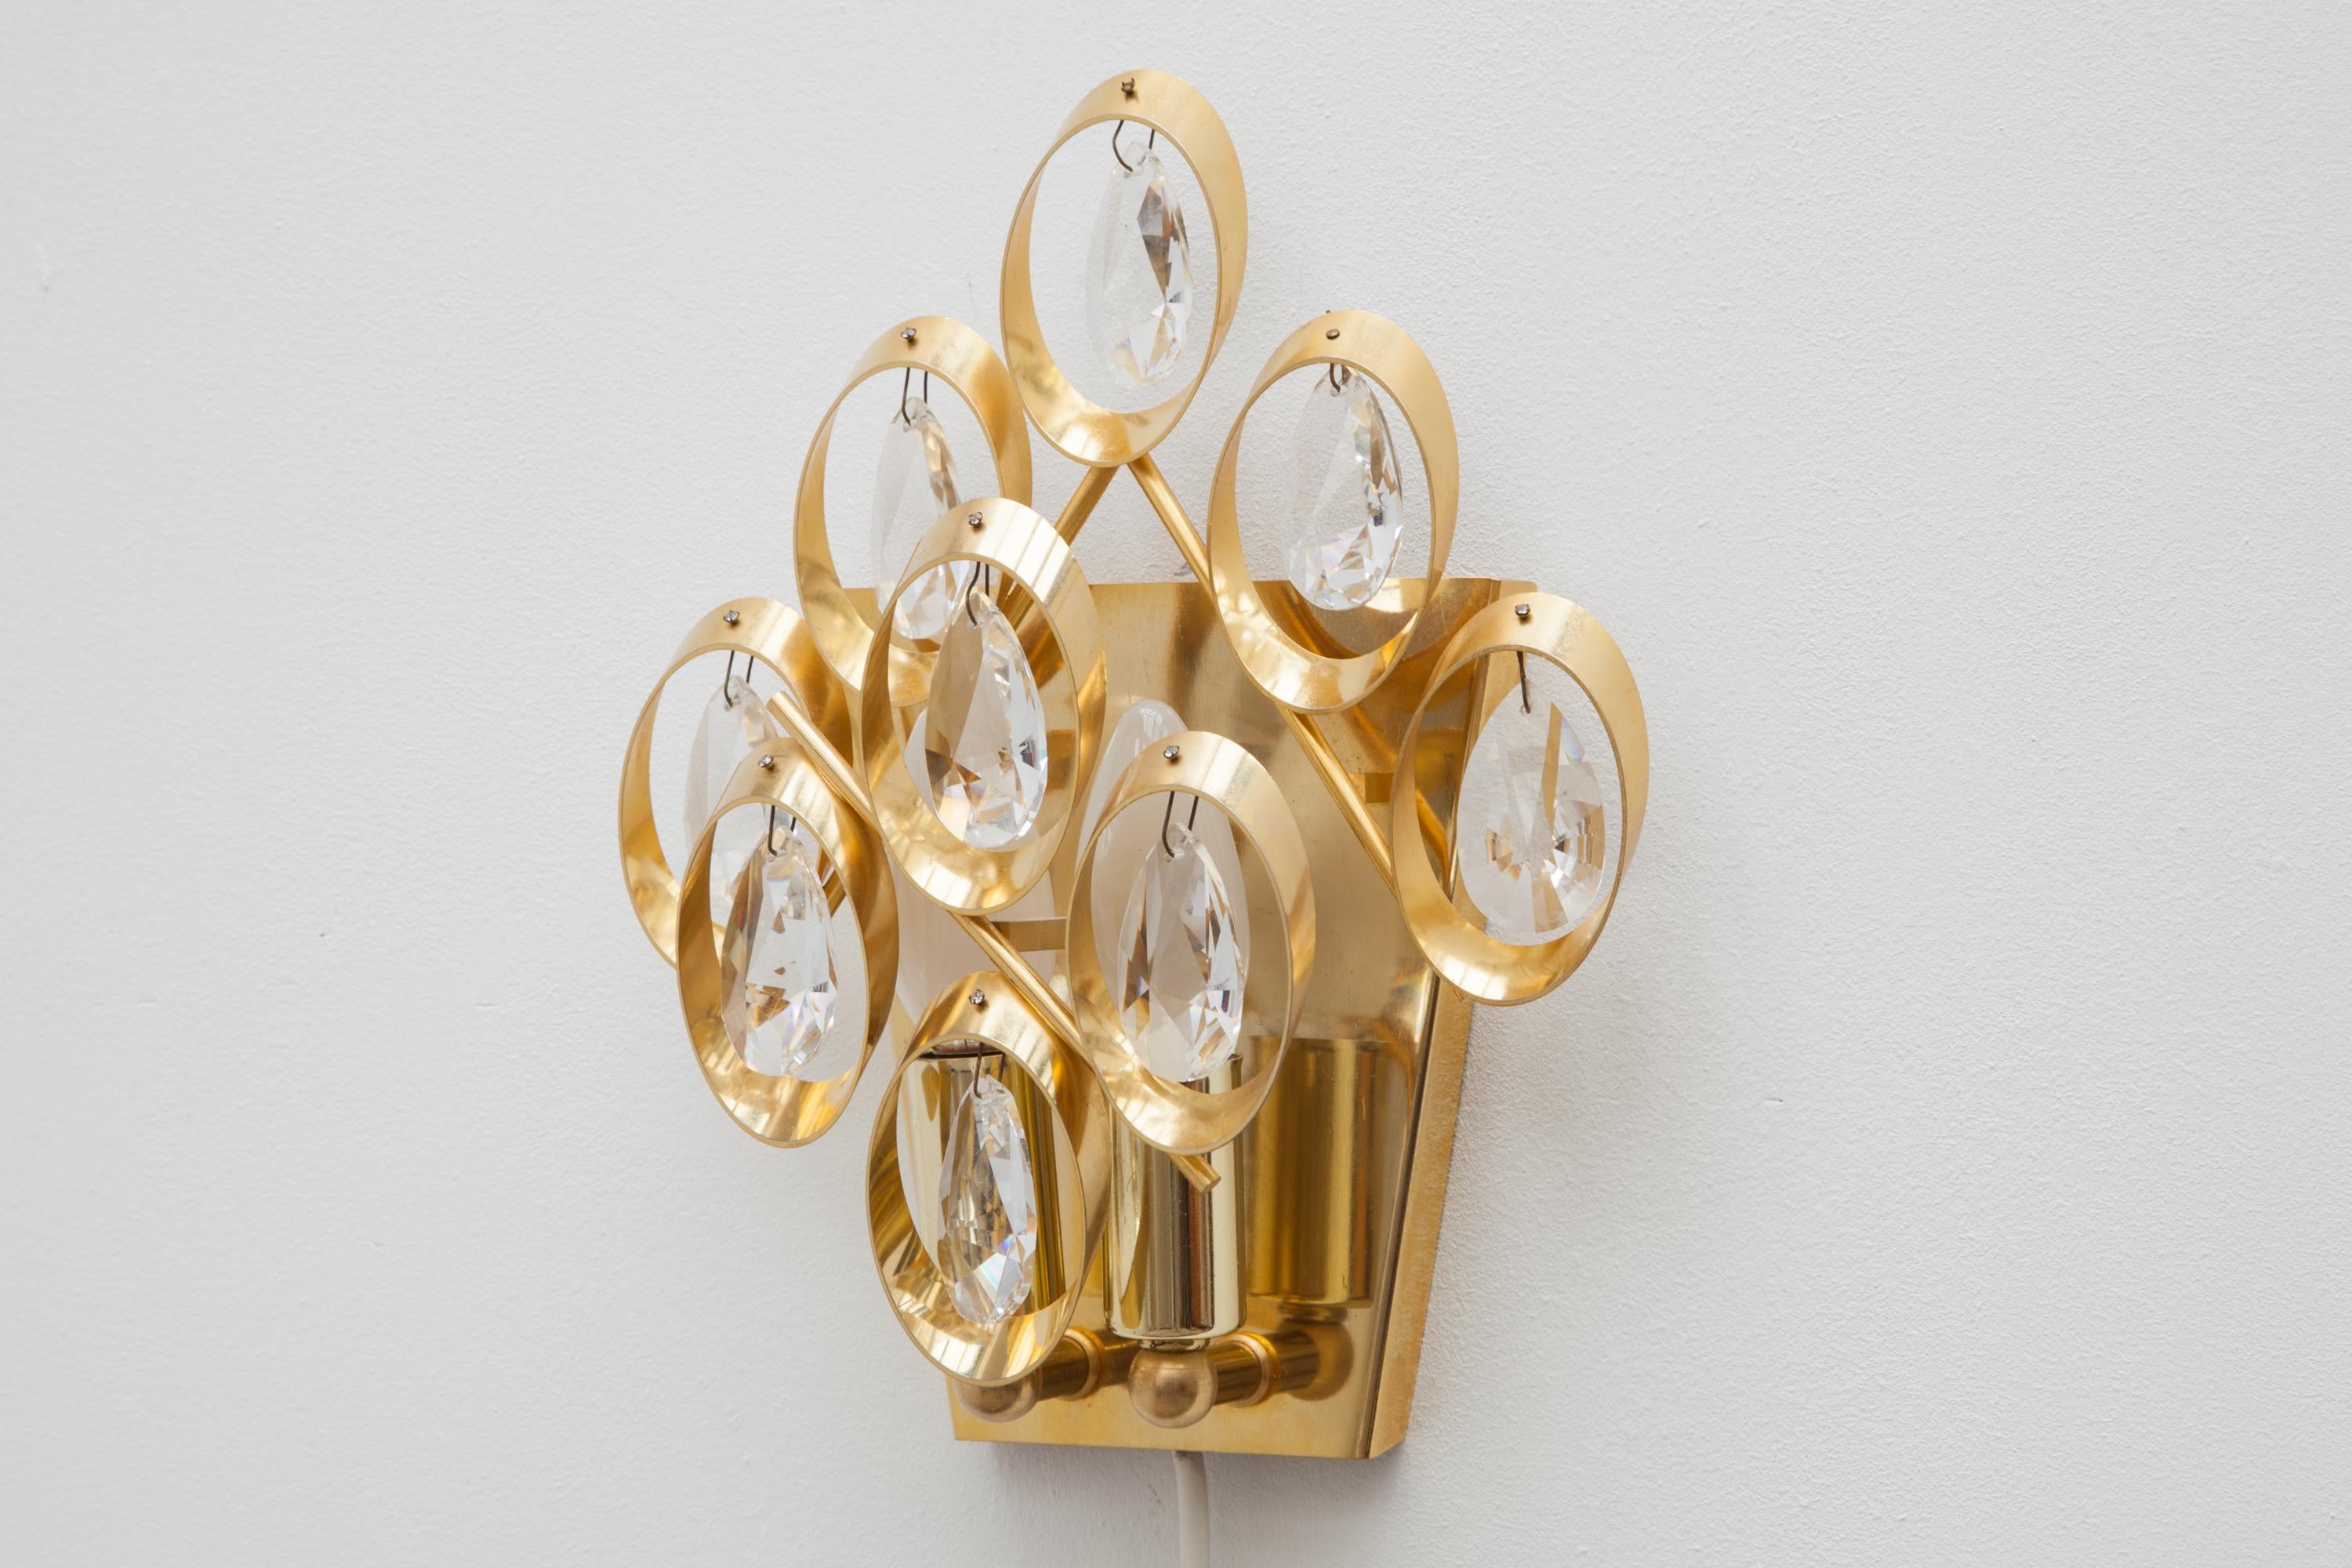 Set of two 1960s wall lights by Palme and Walter, Germany.
Features eight glass crystal teardrops on a frame made of brass, gilt circles.
Lit by two bulbs.23.5 W x 28 H x 10 D cm.